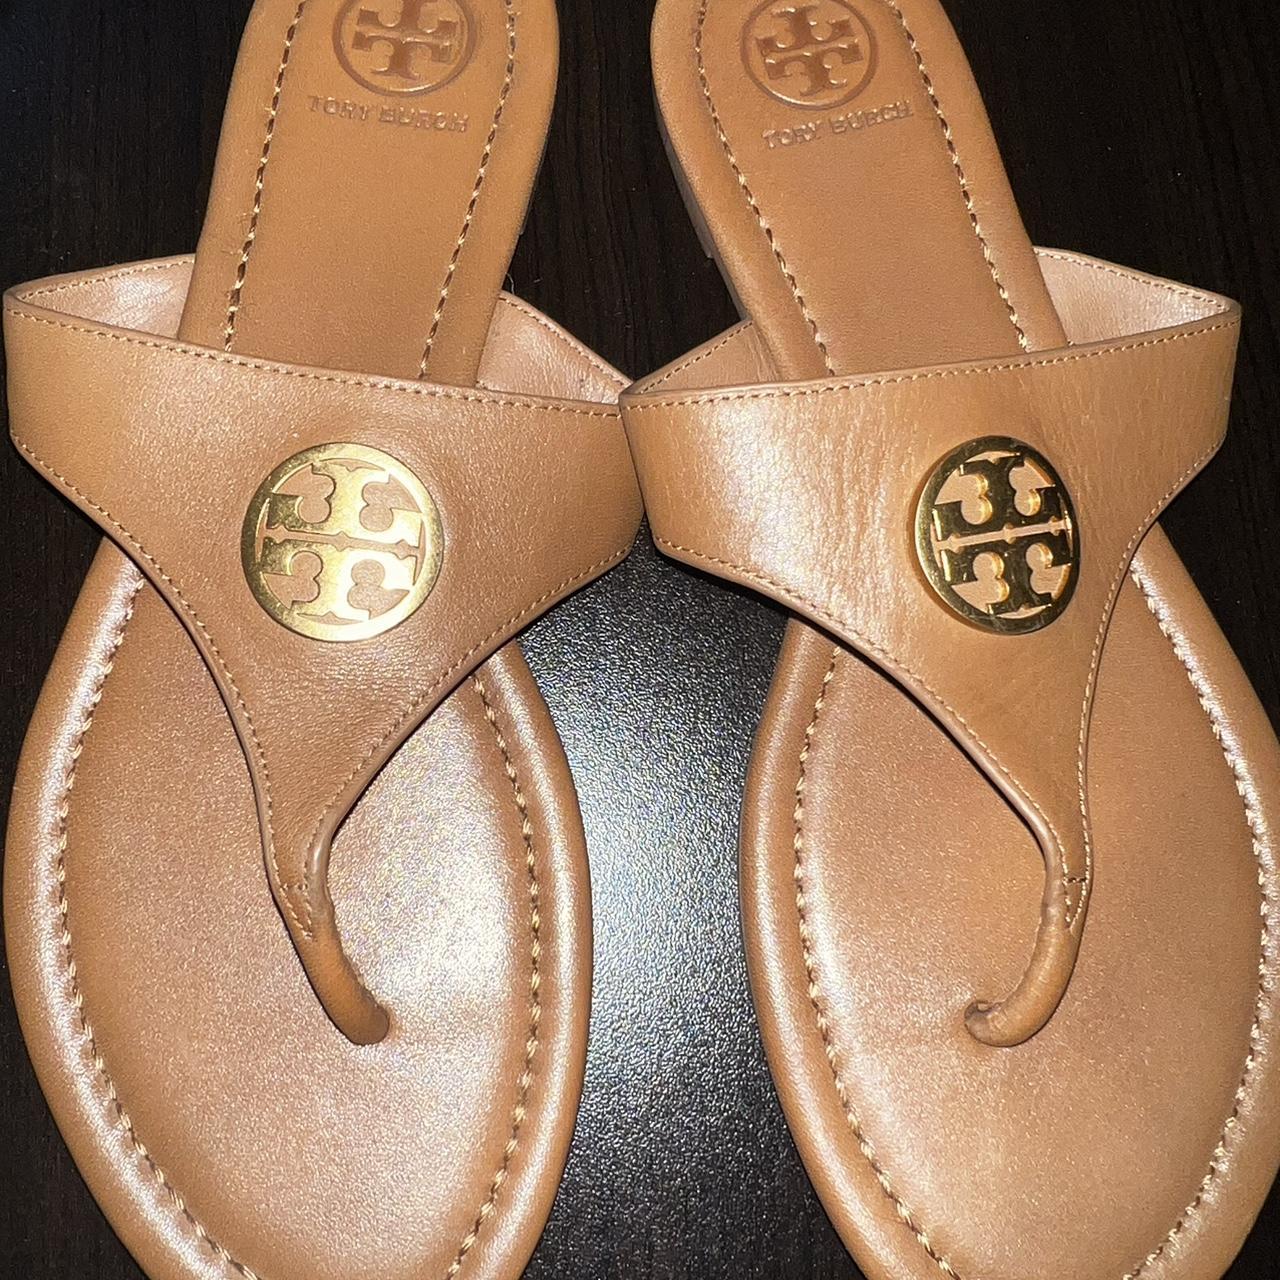 Tory Burch Size 7.5 Med. Camel Color. Leather Flats. Beautiful